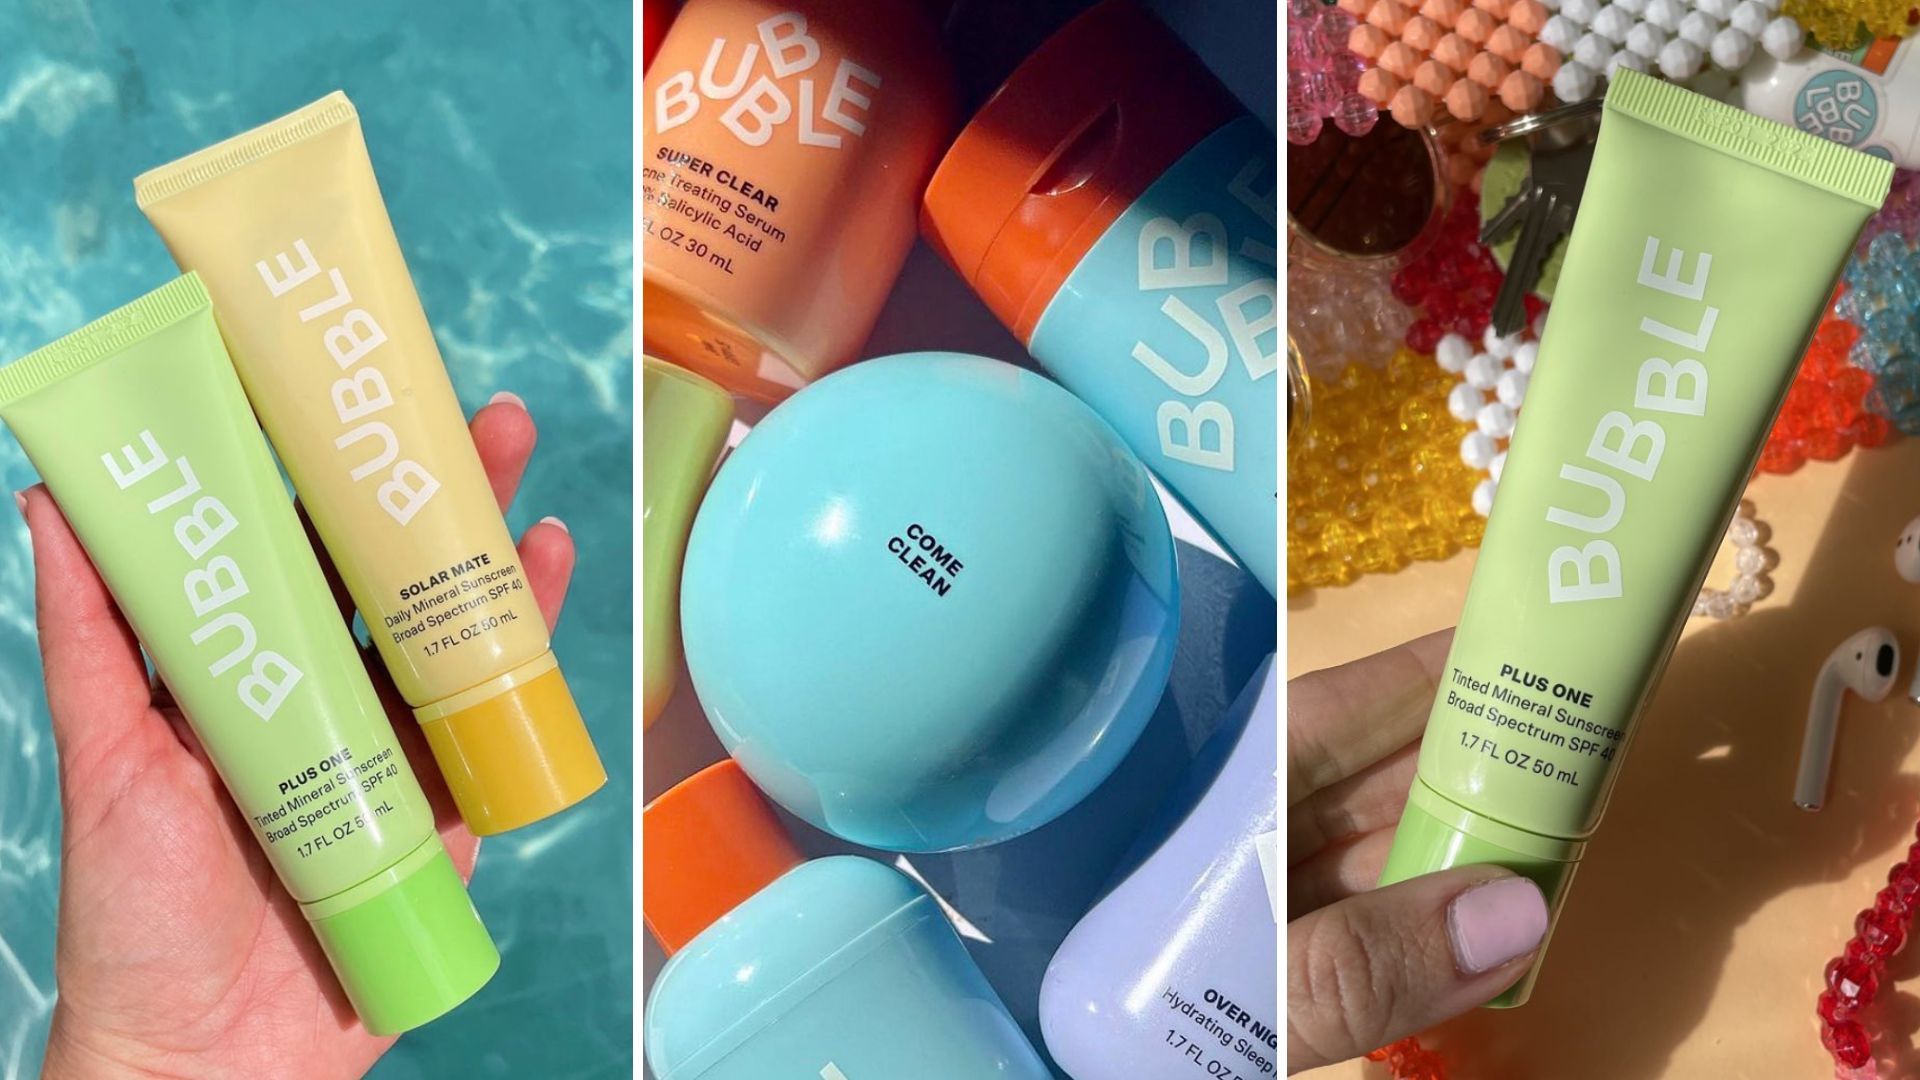 How Bubble Skin-Care Brand Increased Subscriptions with Smartrr App